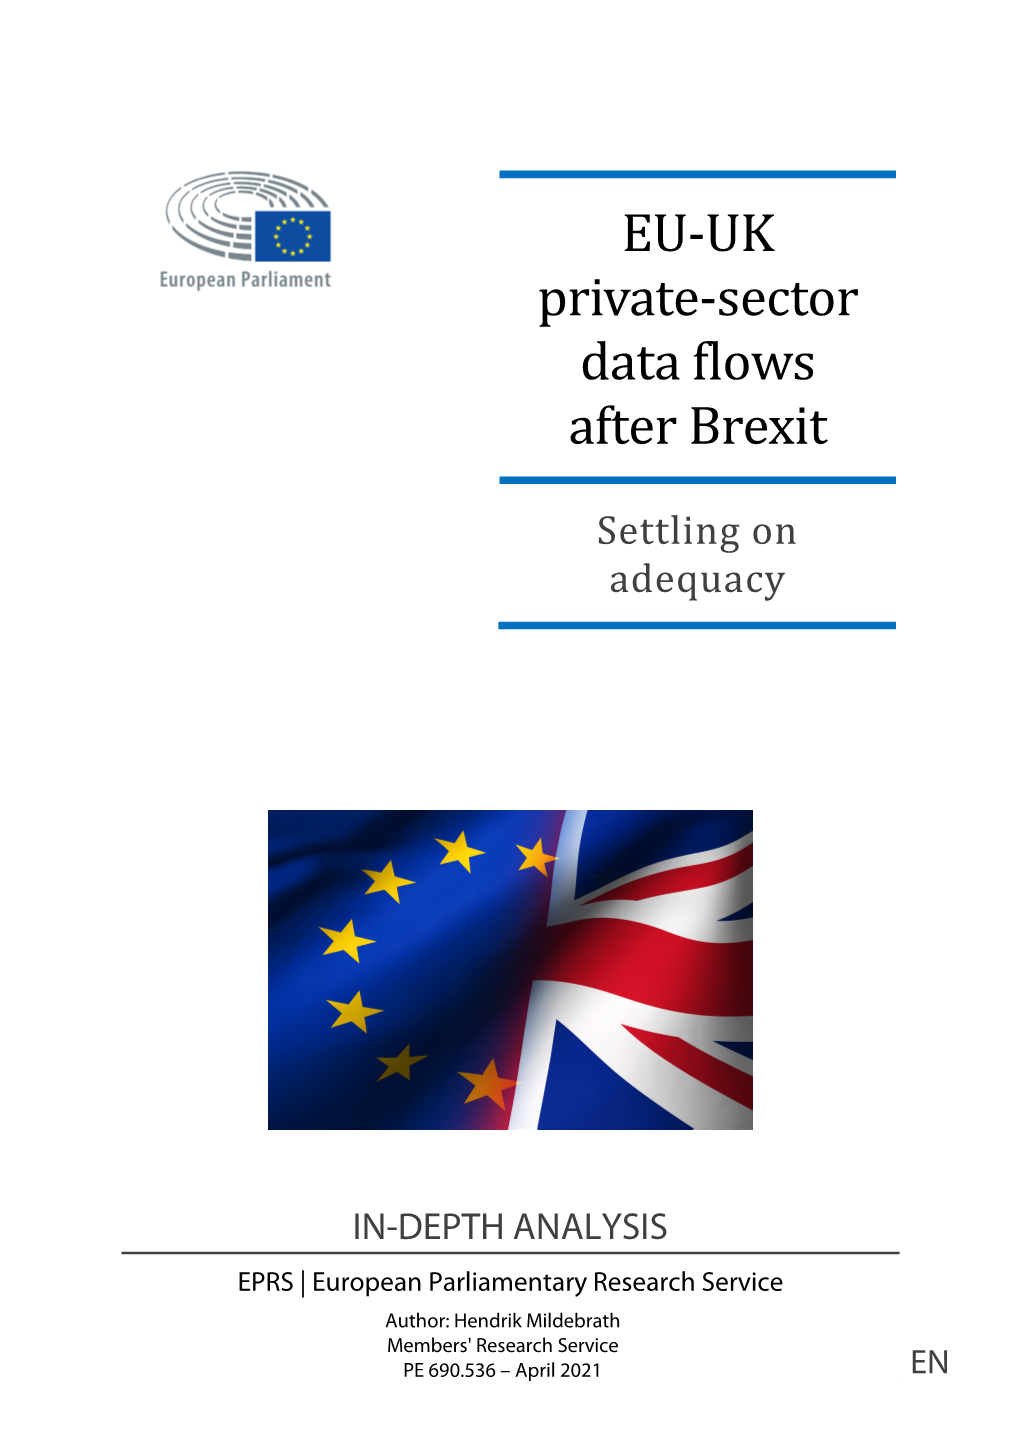 EU-UK Private-Sector Data Flows After Brexit